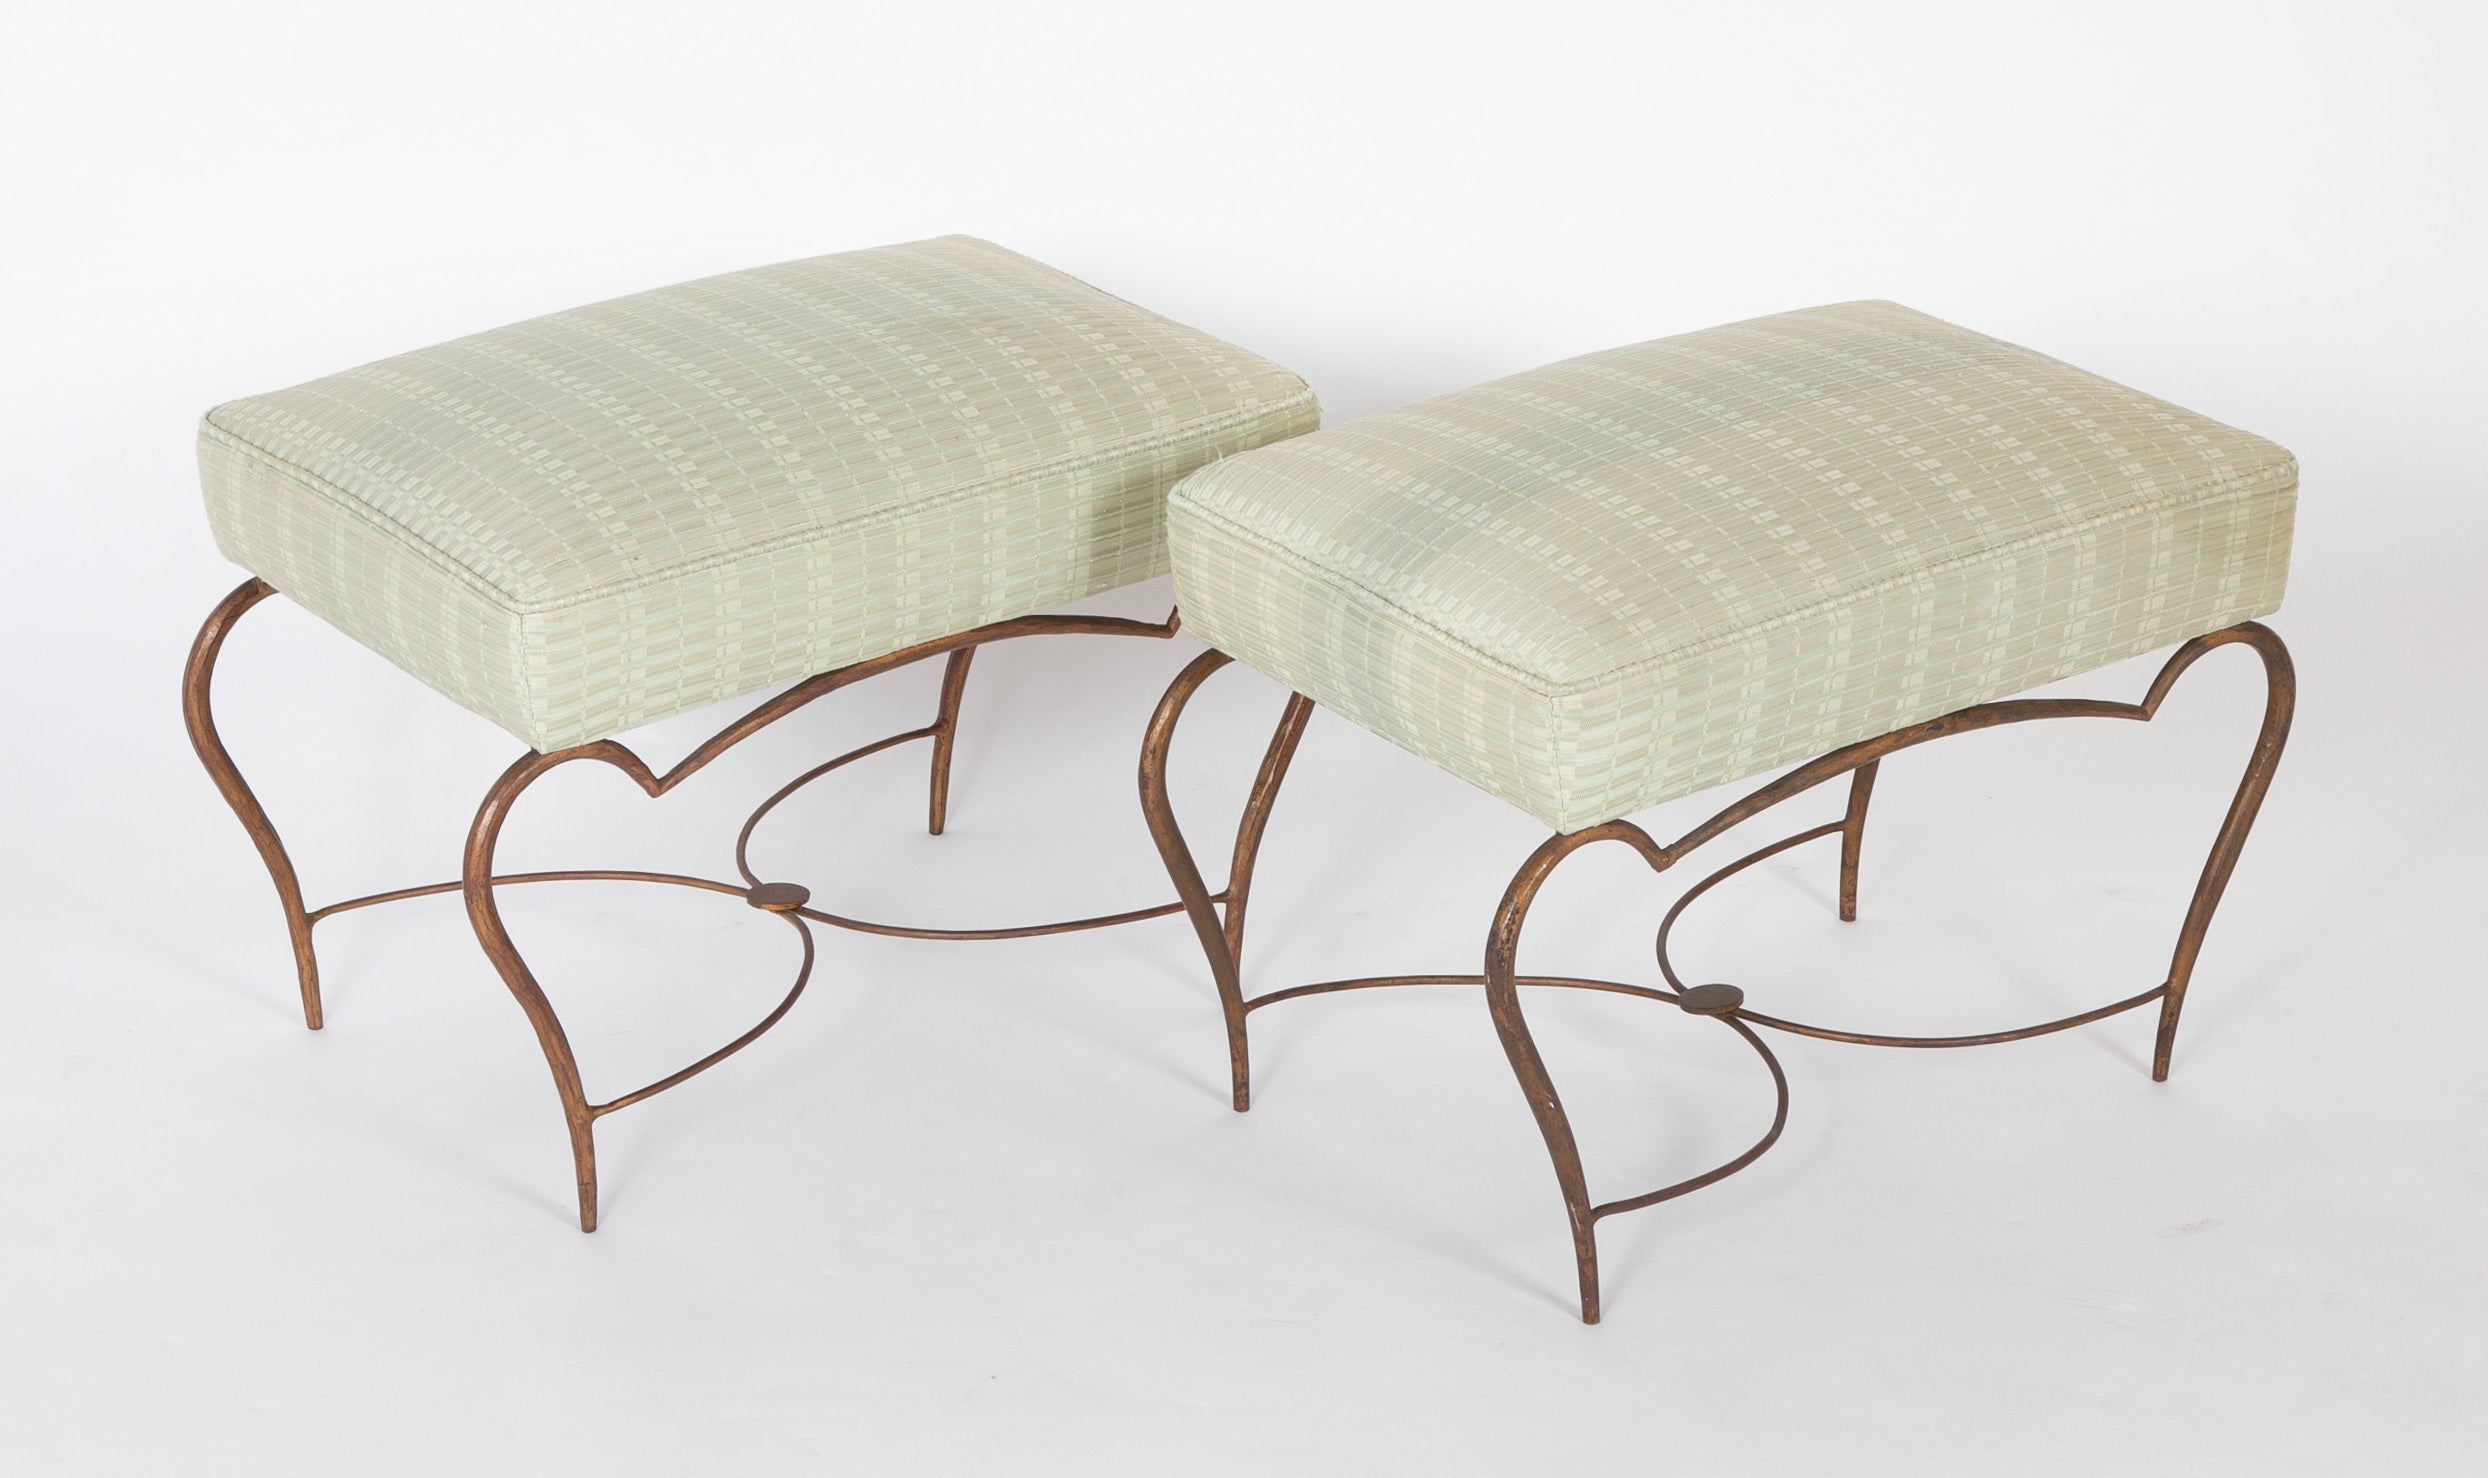 Pair of Patinated Iron Stools by Rene Drouet